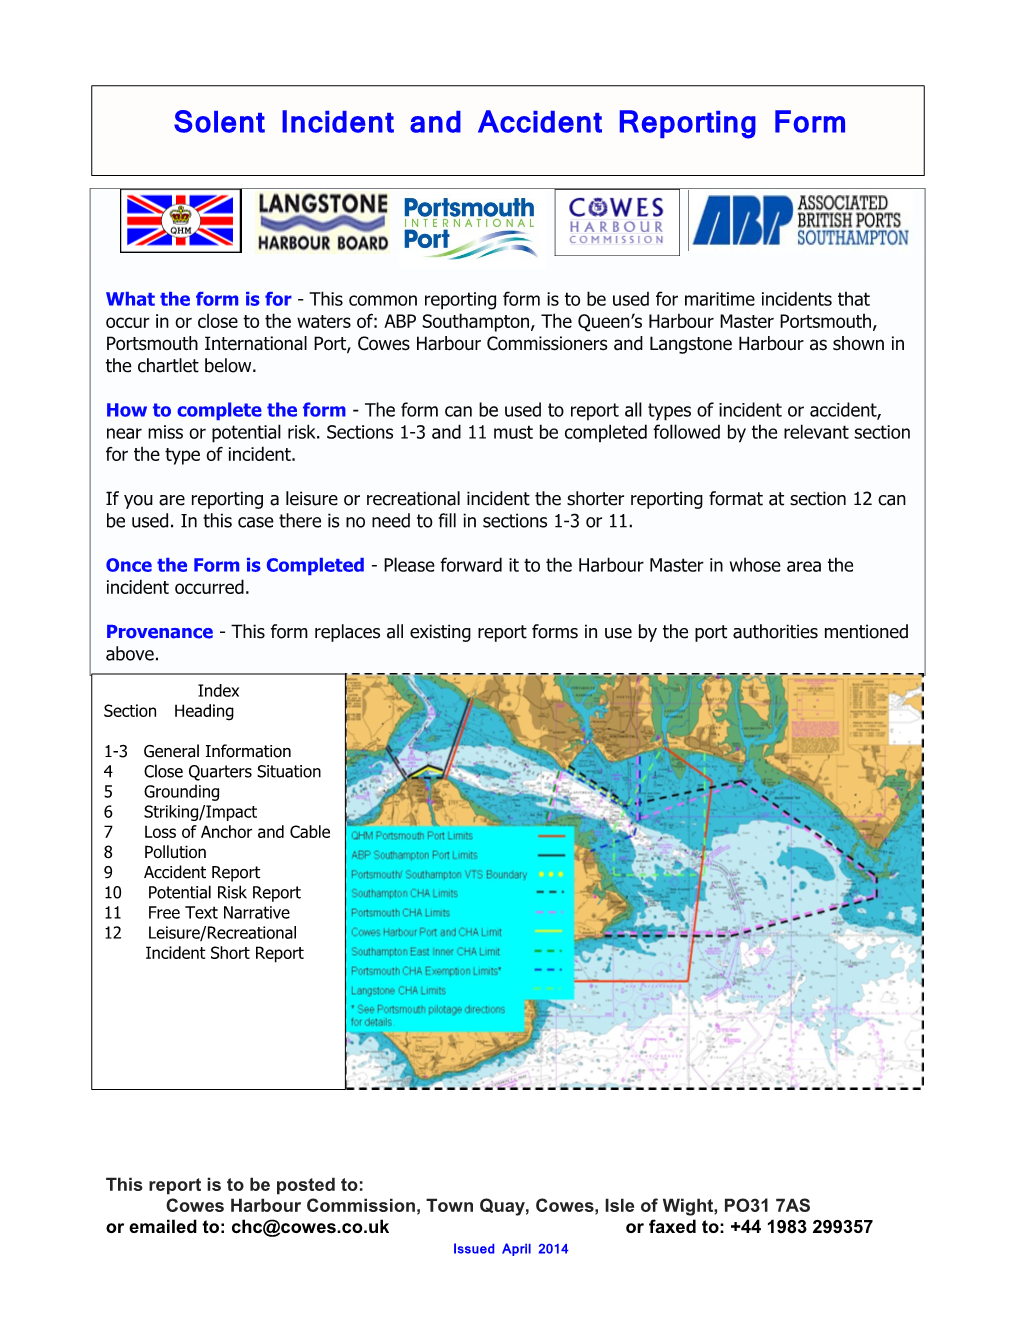 The Solent Operators Group Combined Incident Reporting Form